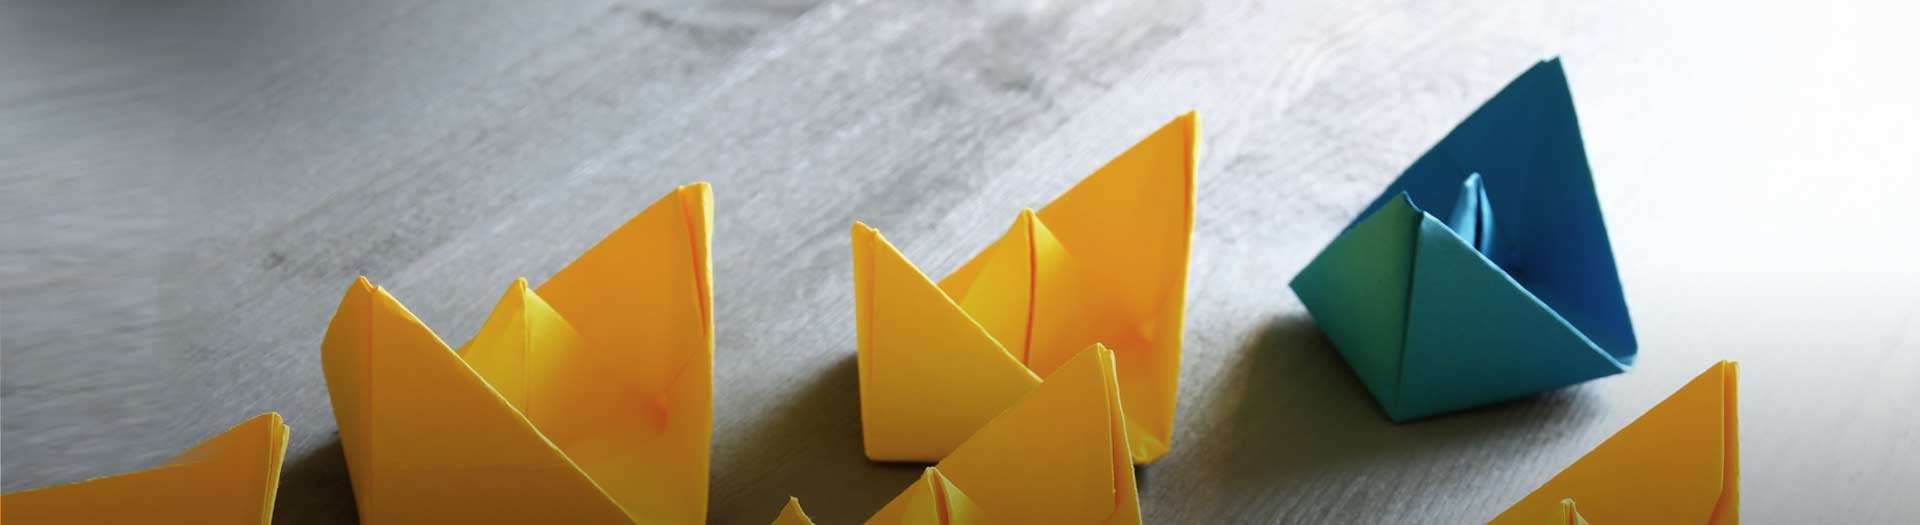 yellow and blue paper boats